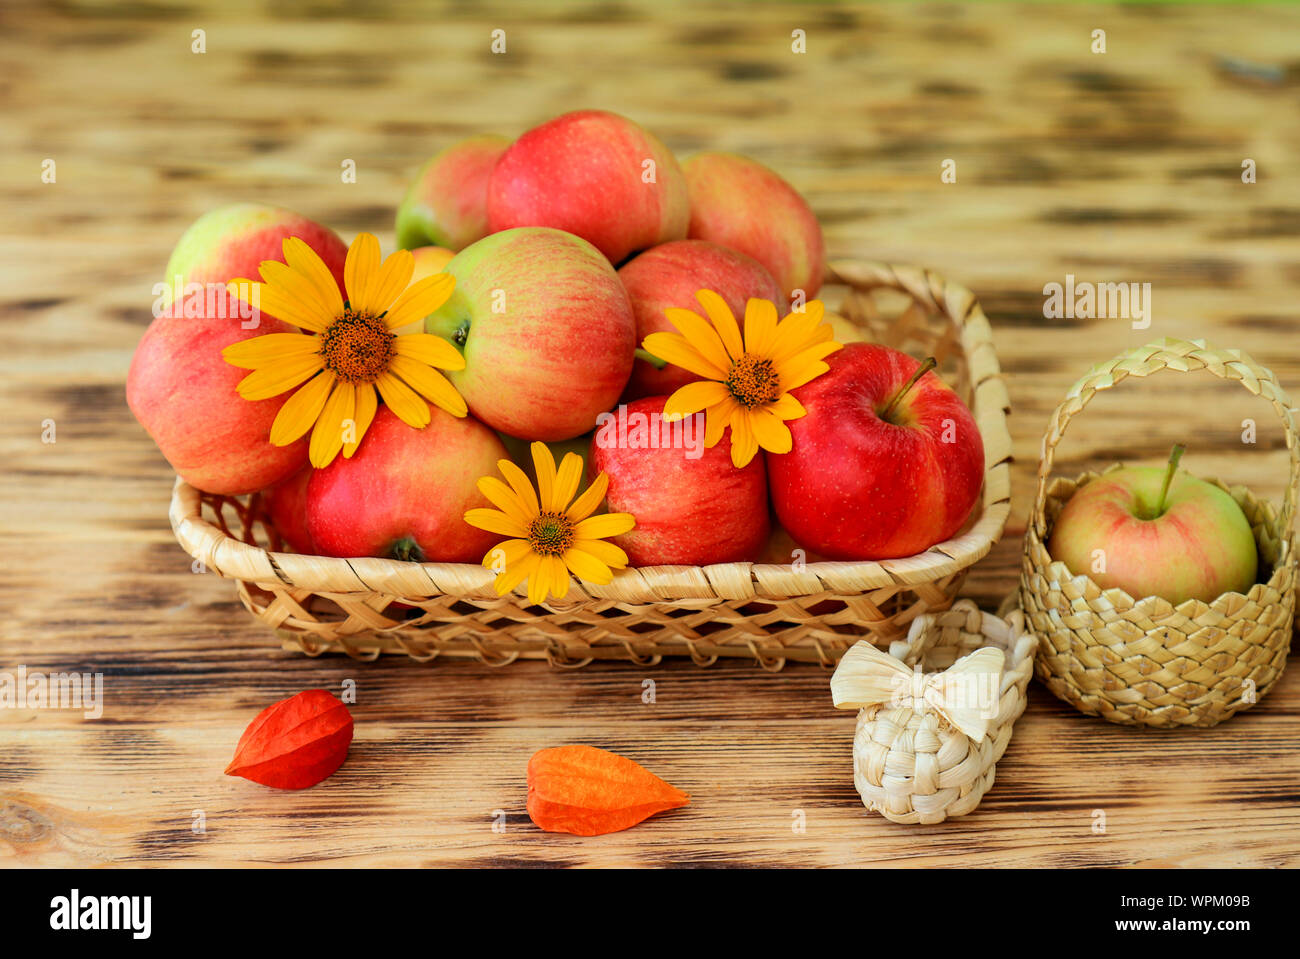 Red ripe apples and autumn flowers lie in a wicker plate on a wooden table. Wicker bast shoes and apples in a basket. Healthy food and lifestyle Stock Photo